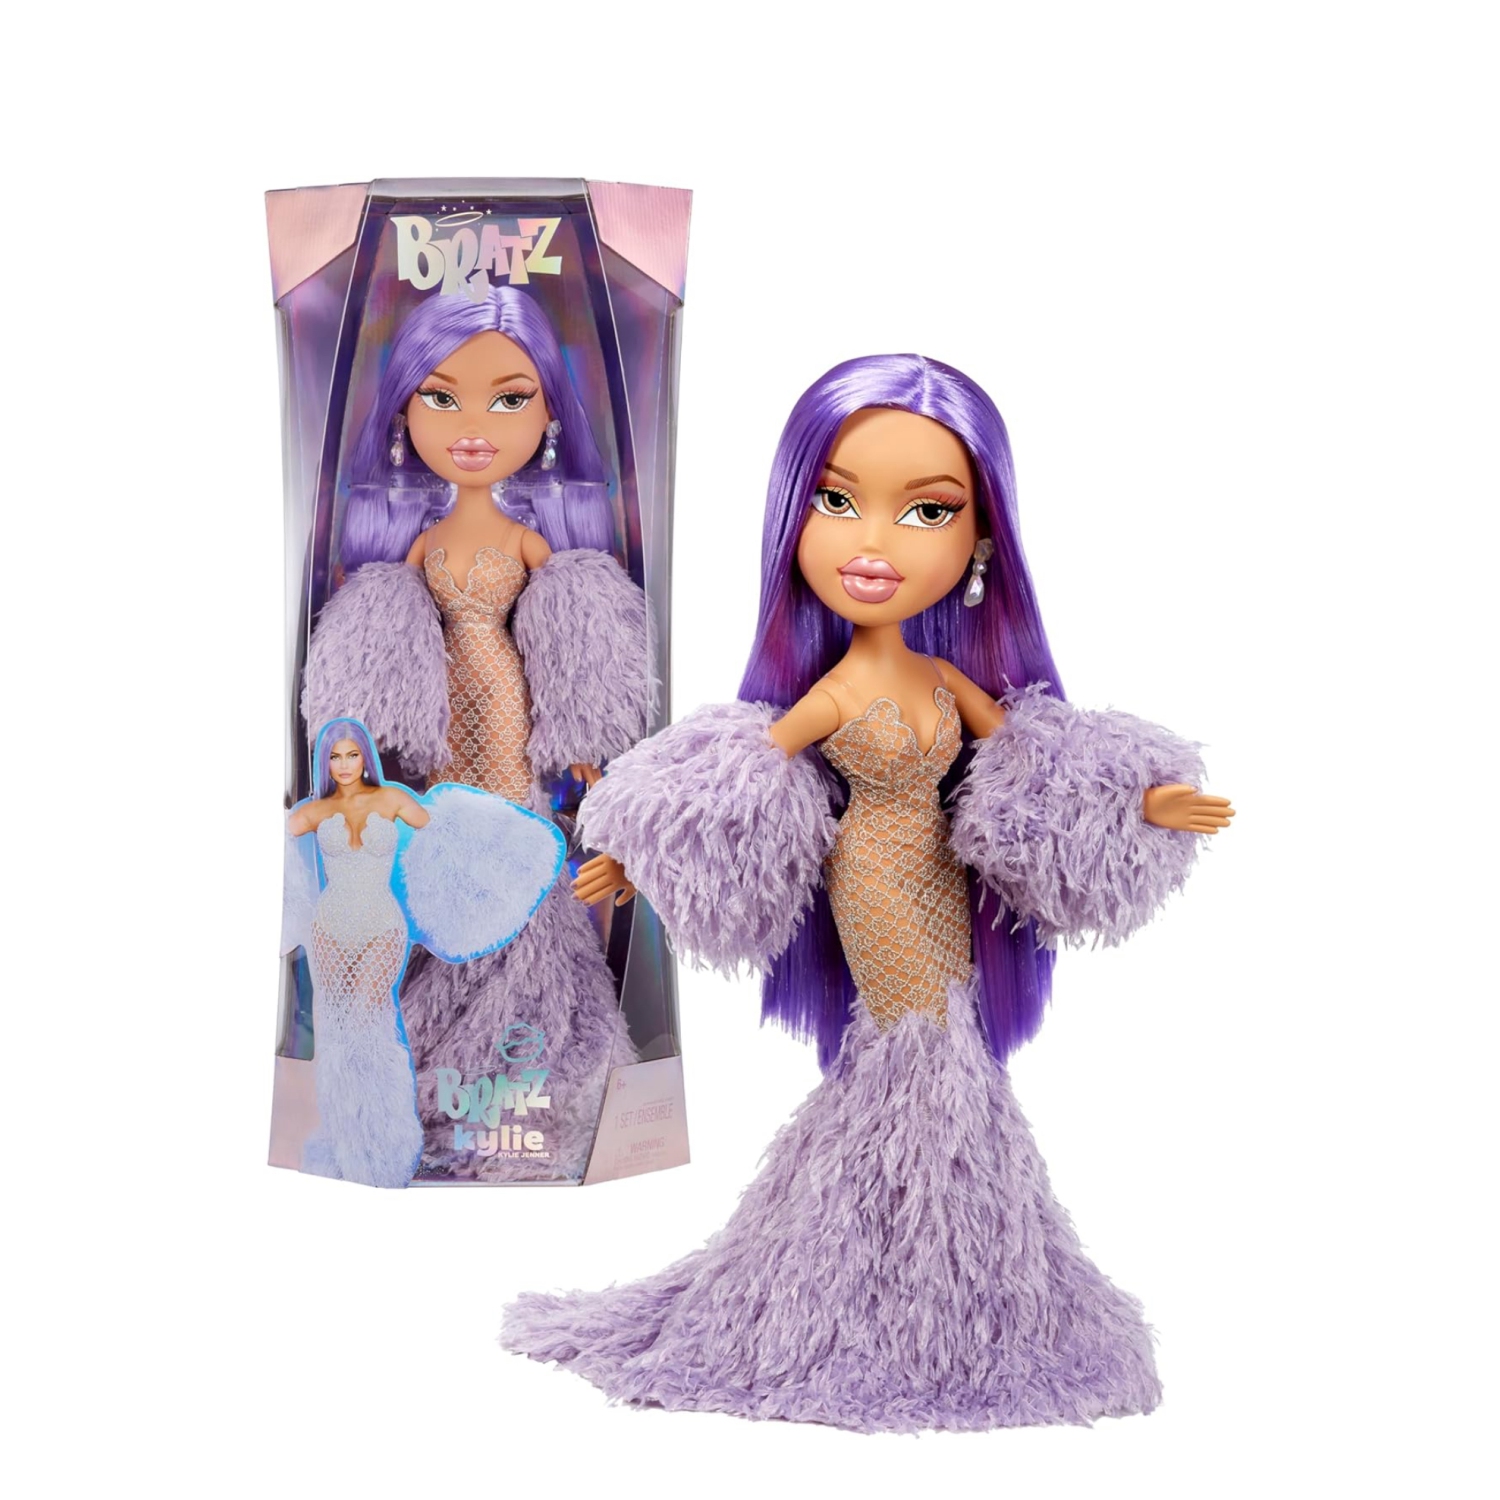 LIMITED EDITION Bratz x Kylie Jenner 24-Inch Large-Scale Fashion